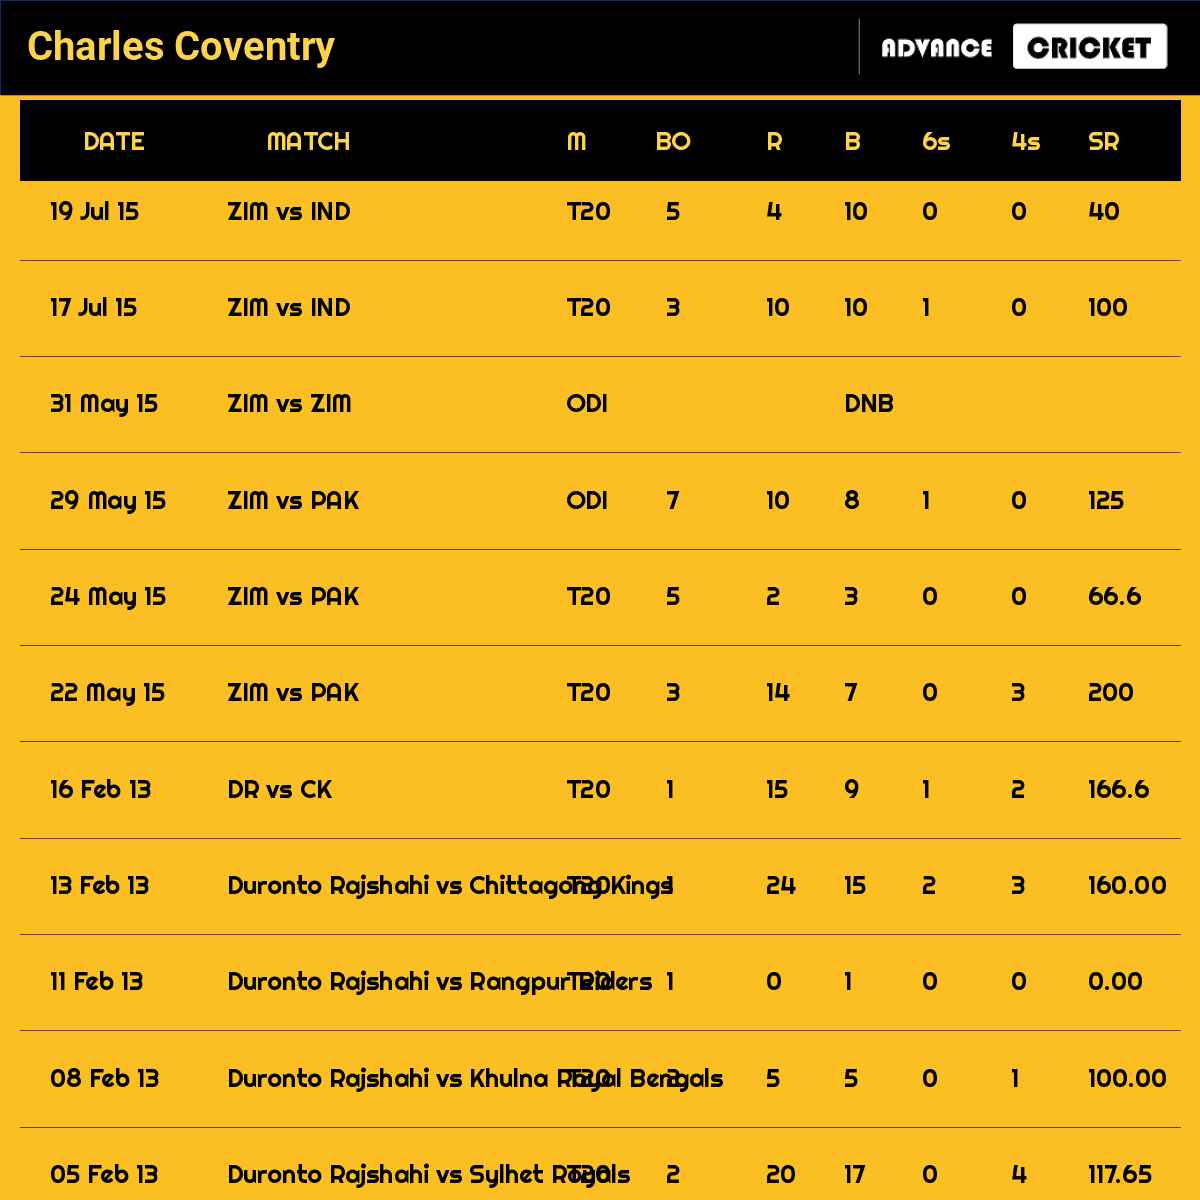 Charles Coventry recent matches